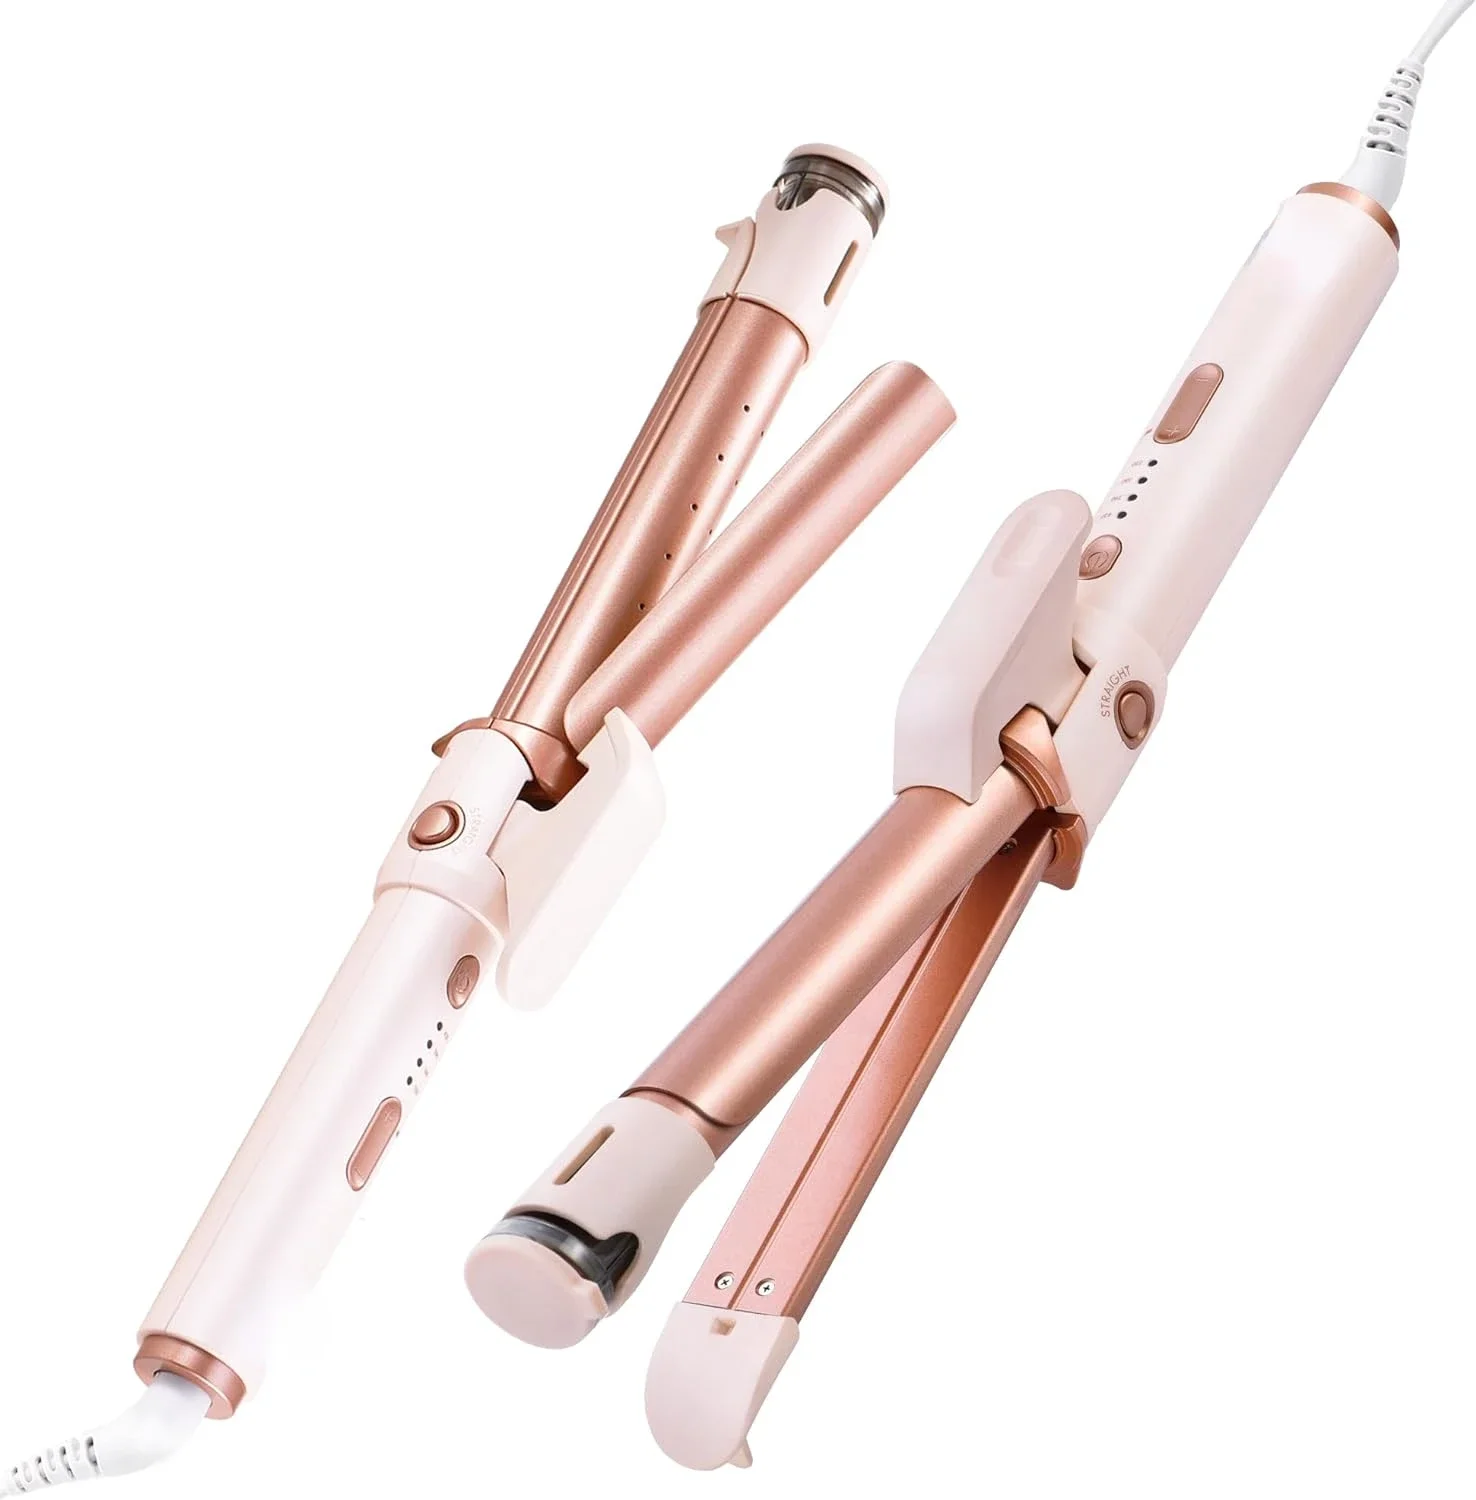 

Professional Ceramic 2-in-1 Curler Iron and Steam Hair Straightener with Negative Ions for Healthy Hair, 1 Inch Hair Curling Wan